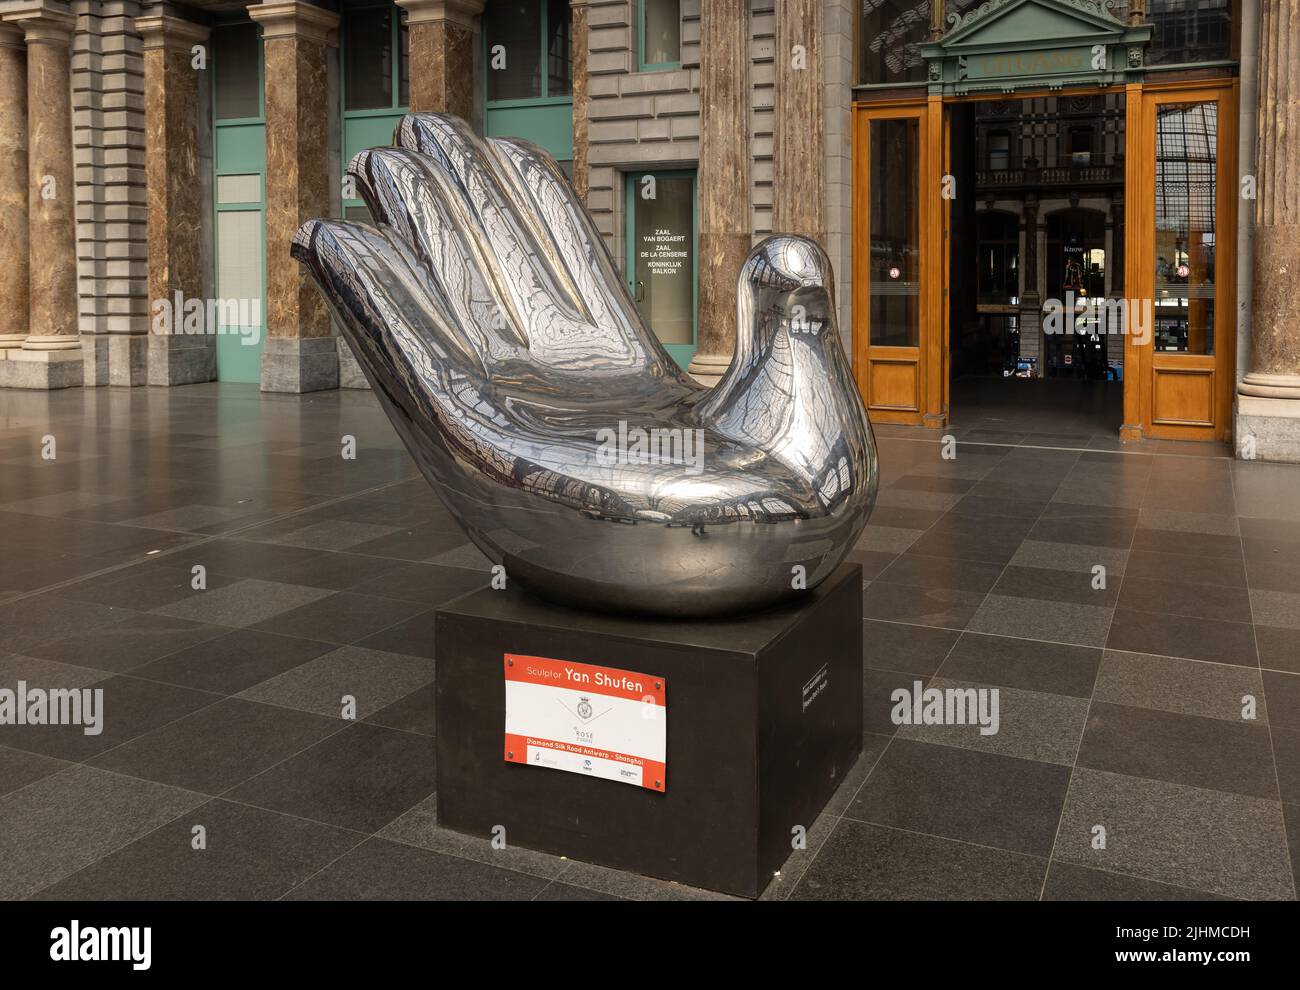 Side view of Hand of peace sculpture by Chinese born artist Yan shufen at Antwerp railway station. The symbol of hand and dove at Antwerp Central Stat Stock Photo